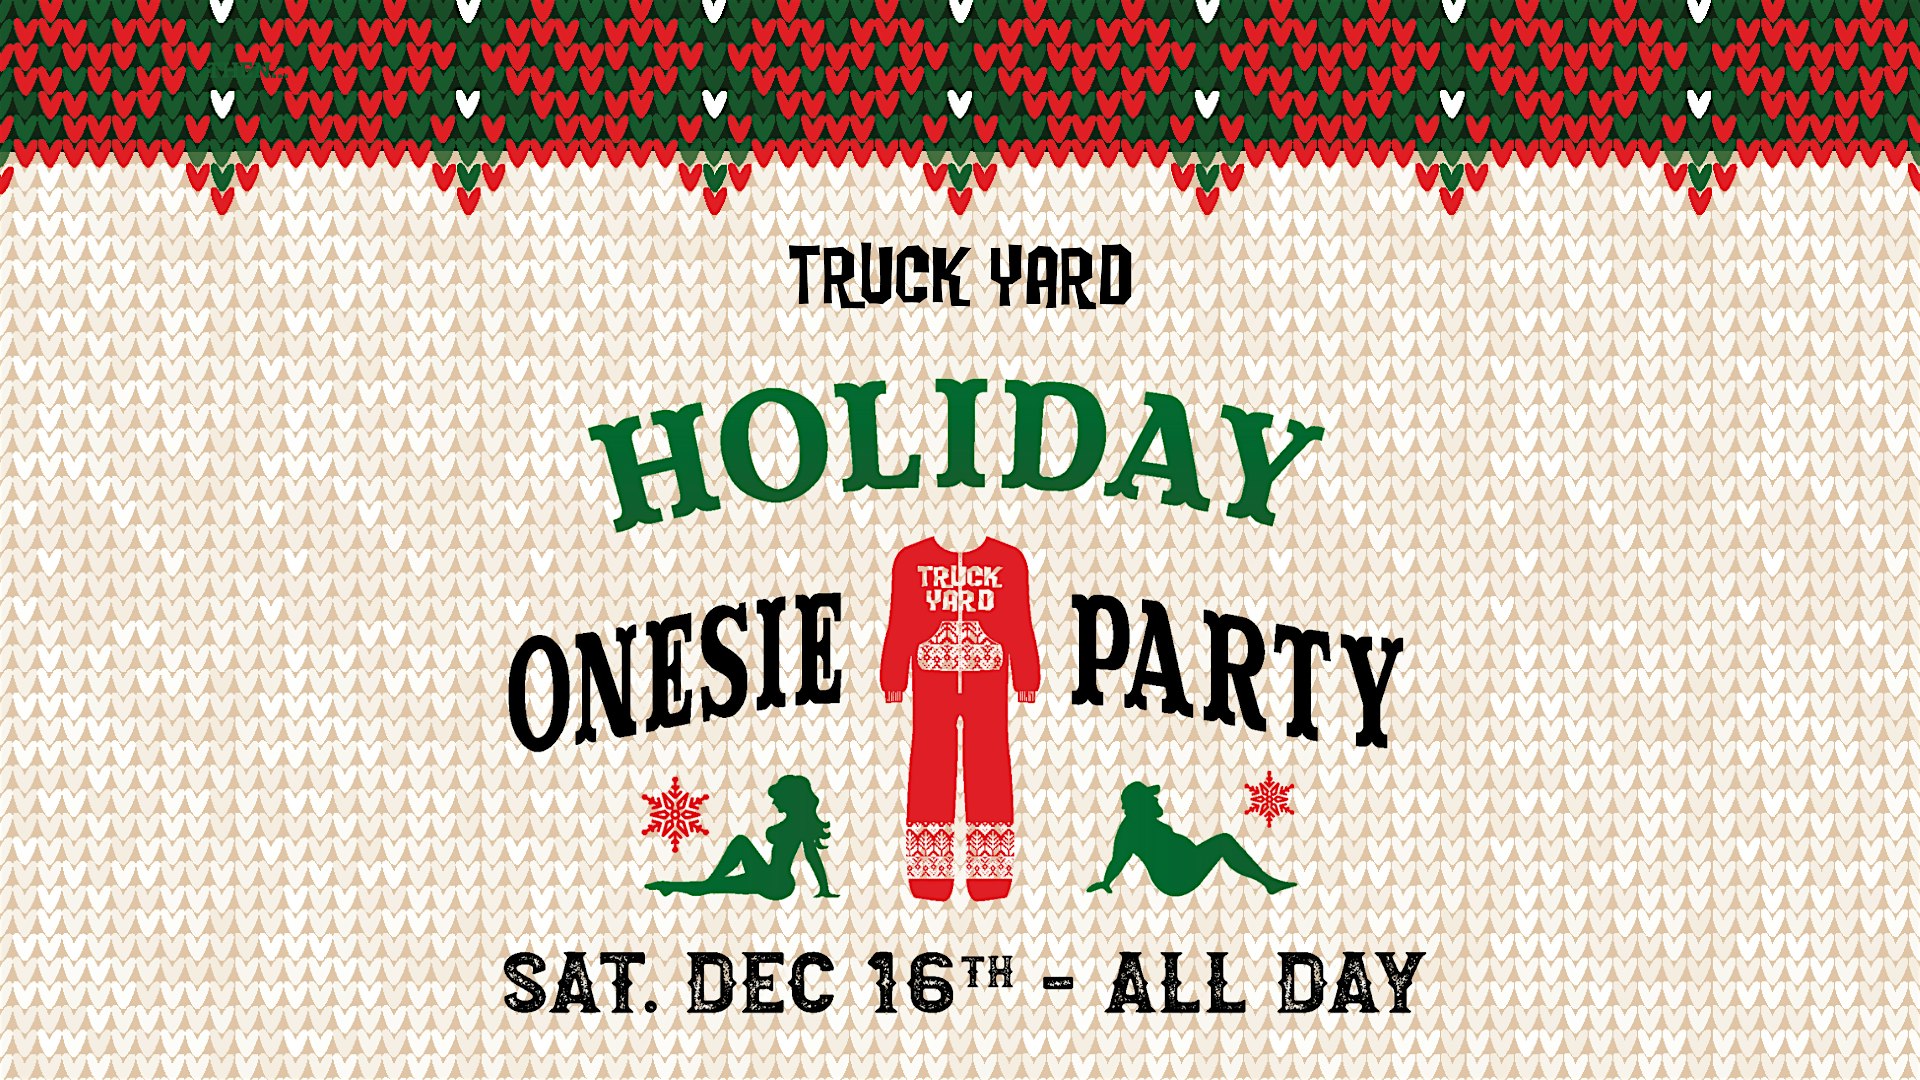 TRUCK YARD'S ANNUAL HOLIDAY ONESIE PARTY